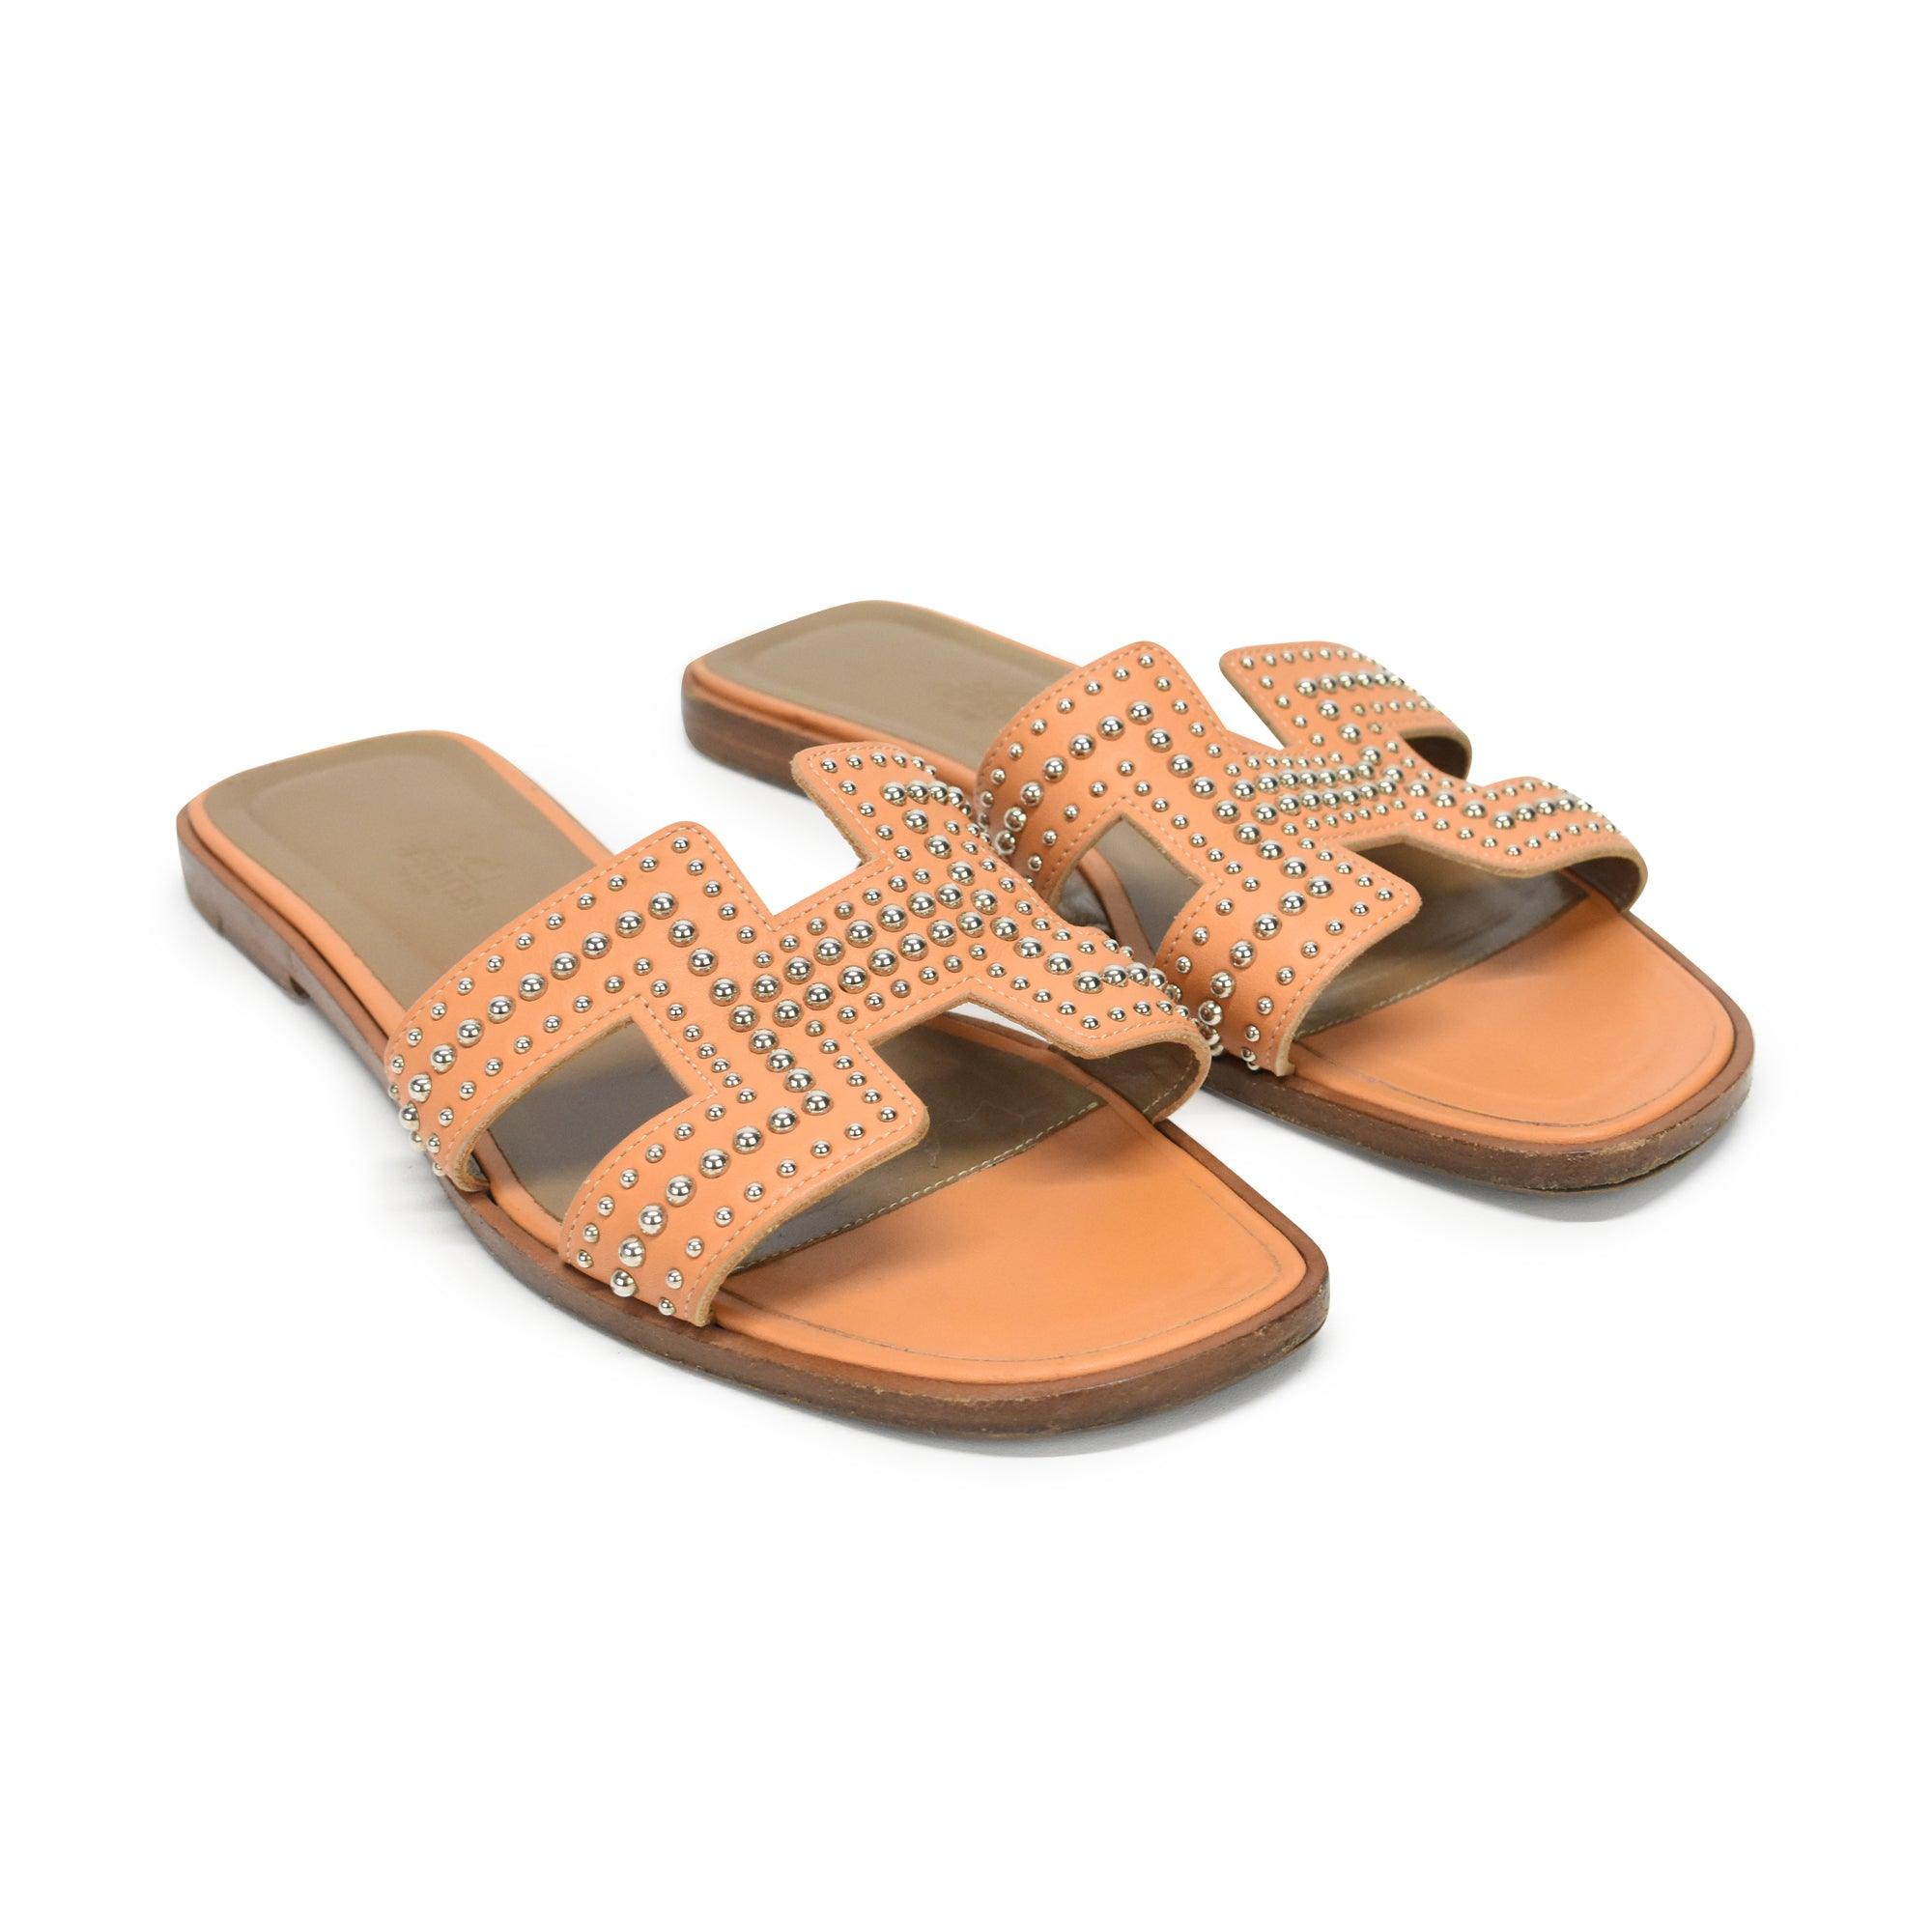 Hermes 'Oran' Sandals - Women's 36.5 - Fashionably Yours